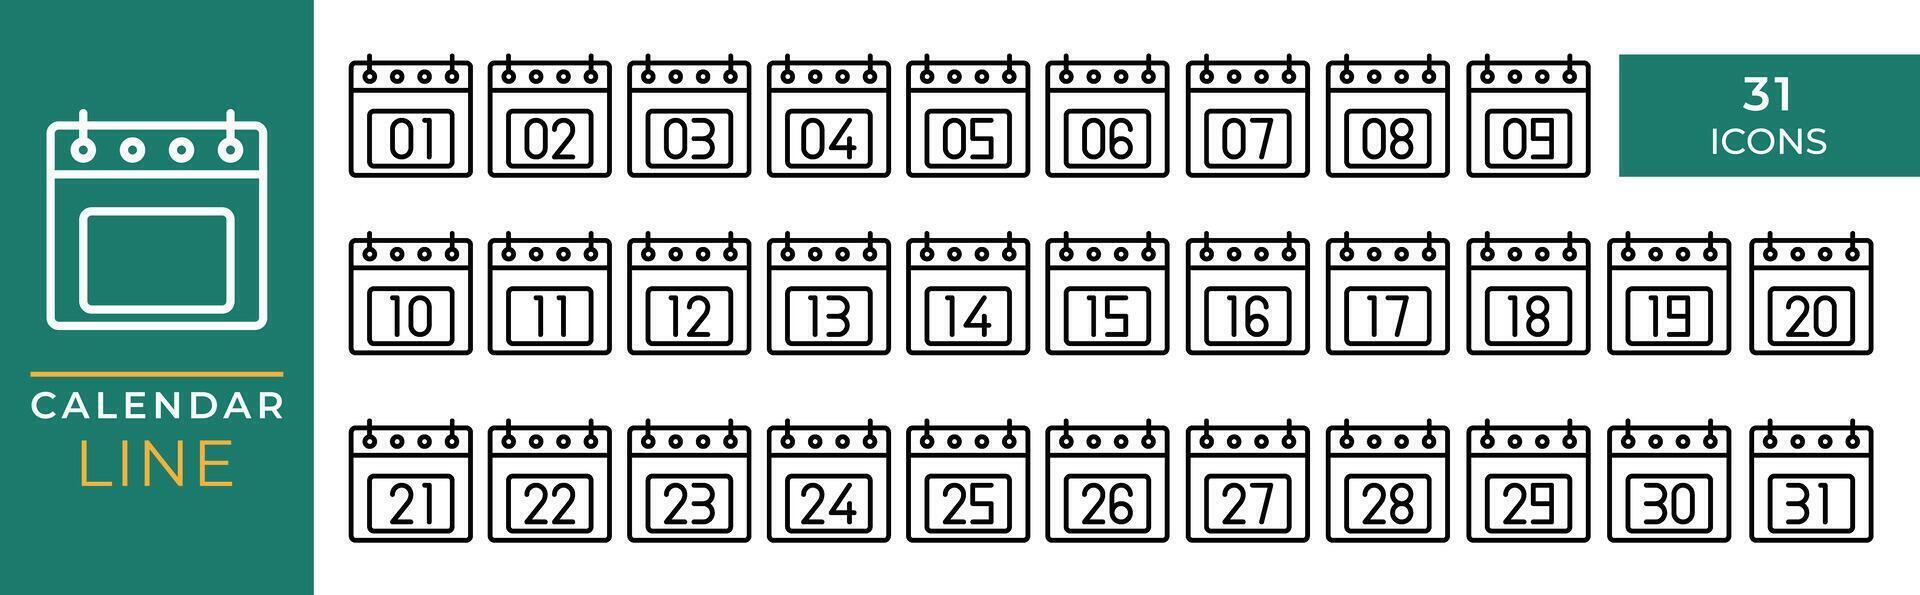 Set Calendar icons Graphic design vector illustration. can be used for website interfaces, mobile applications and software